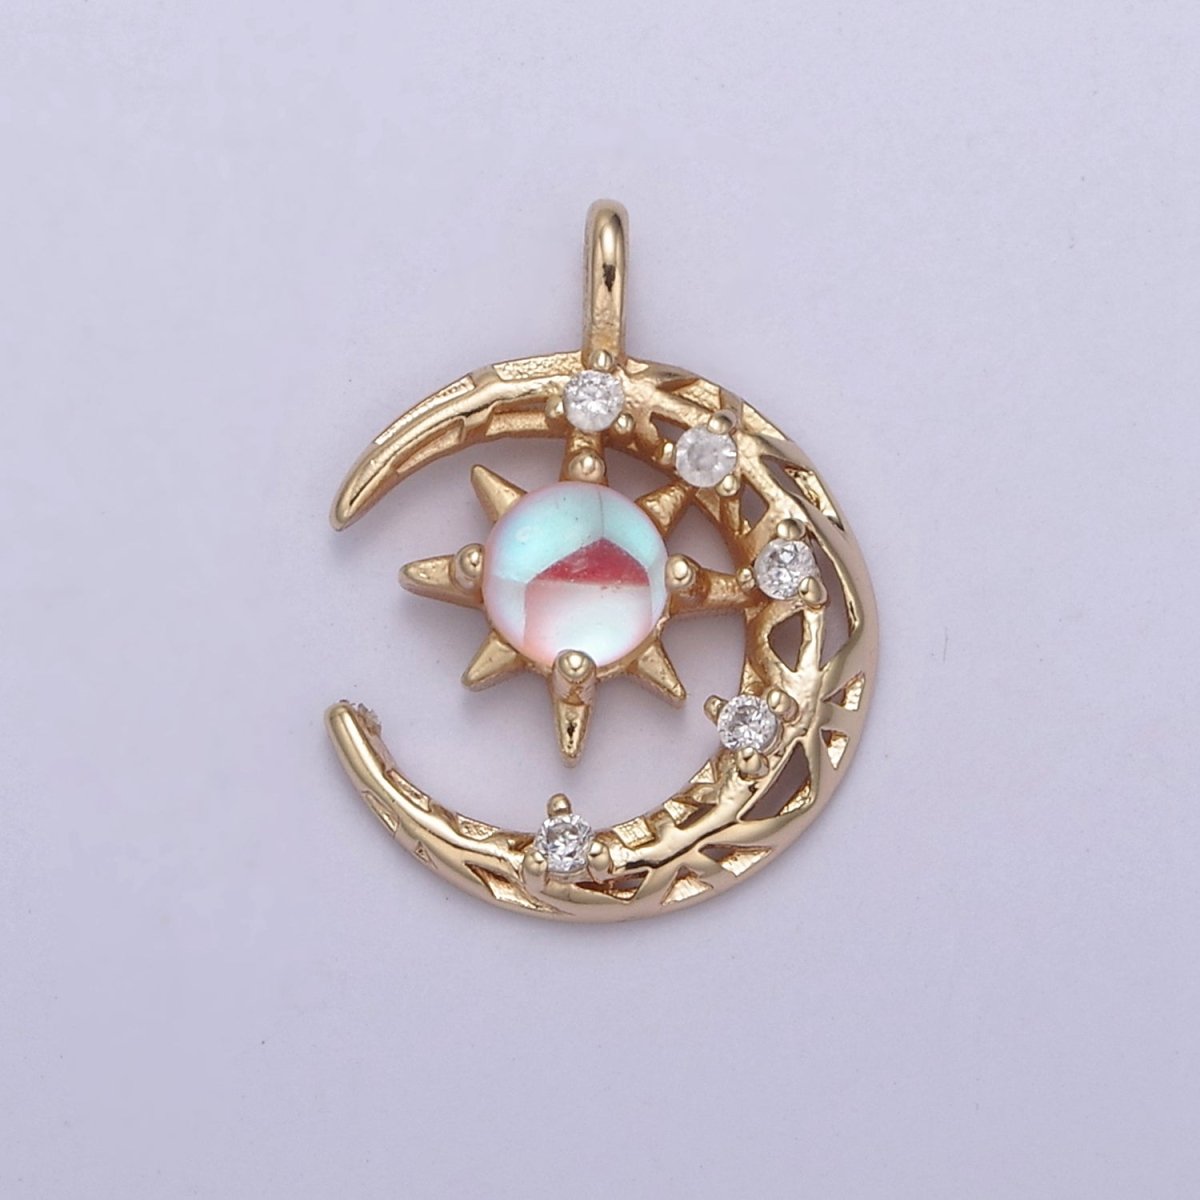 Mini Micro Pave Rainbow Moonstone Crescent Moon Pendant in 14k Gold Filled Celestial Jewelry June Birthstone N-704 - DLUXCA